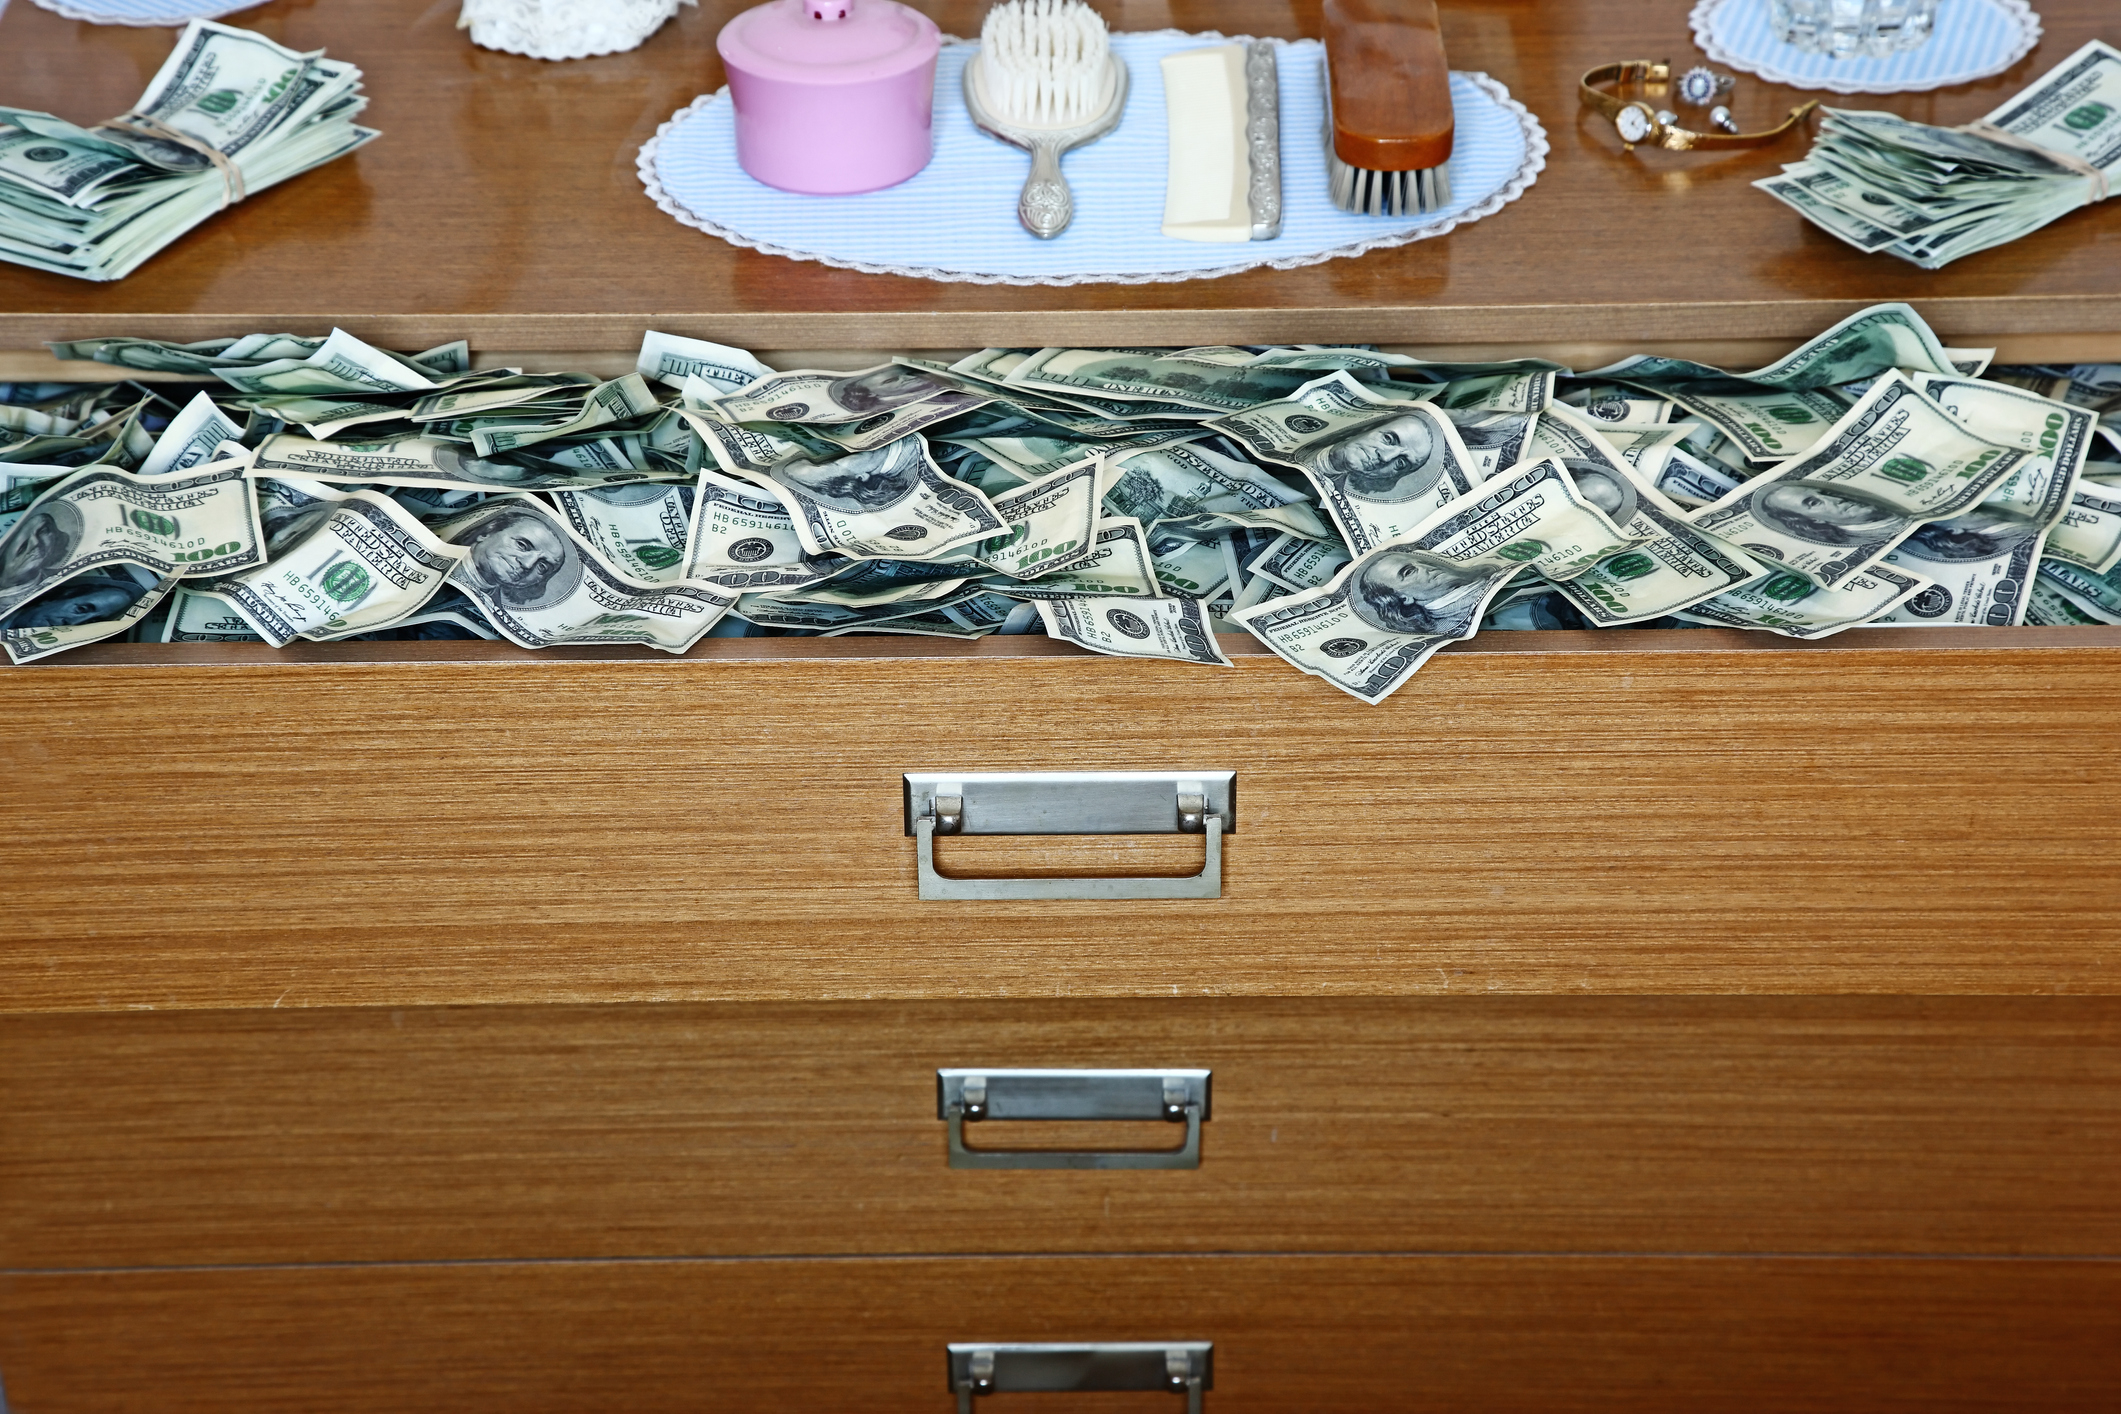 Drawers with cash sticking out, suggesting hidden wealth or savings